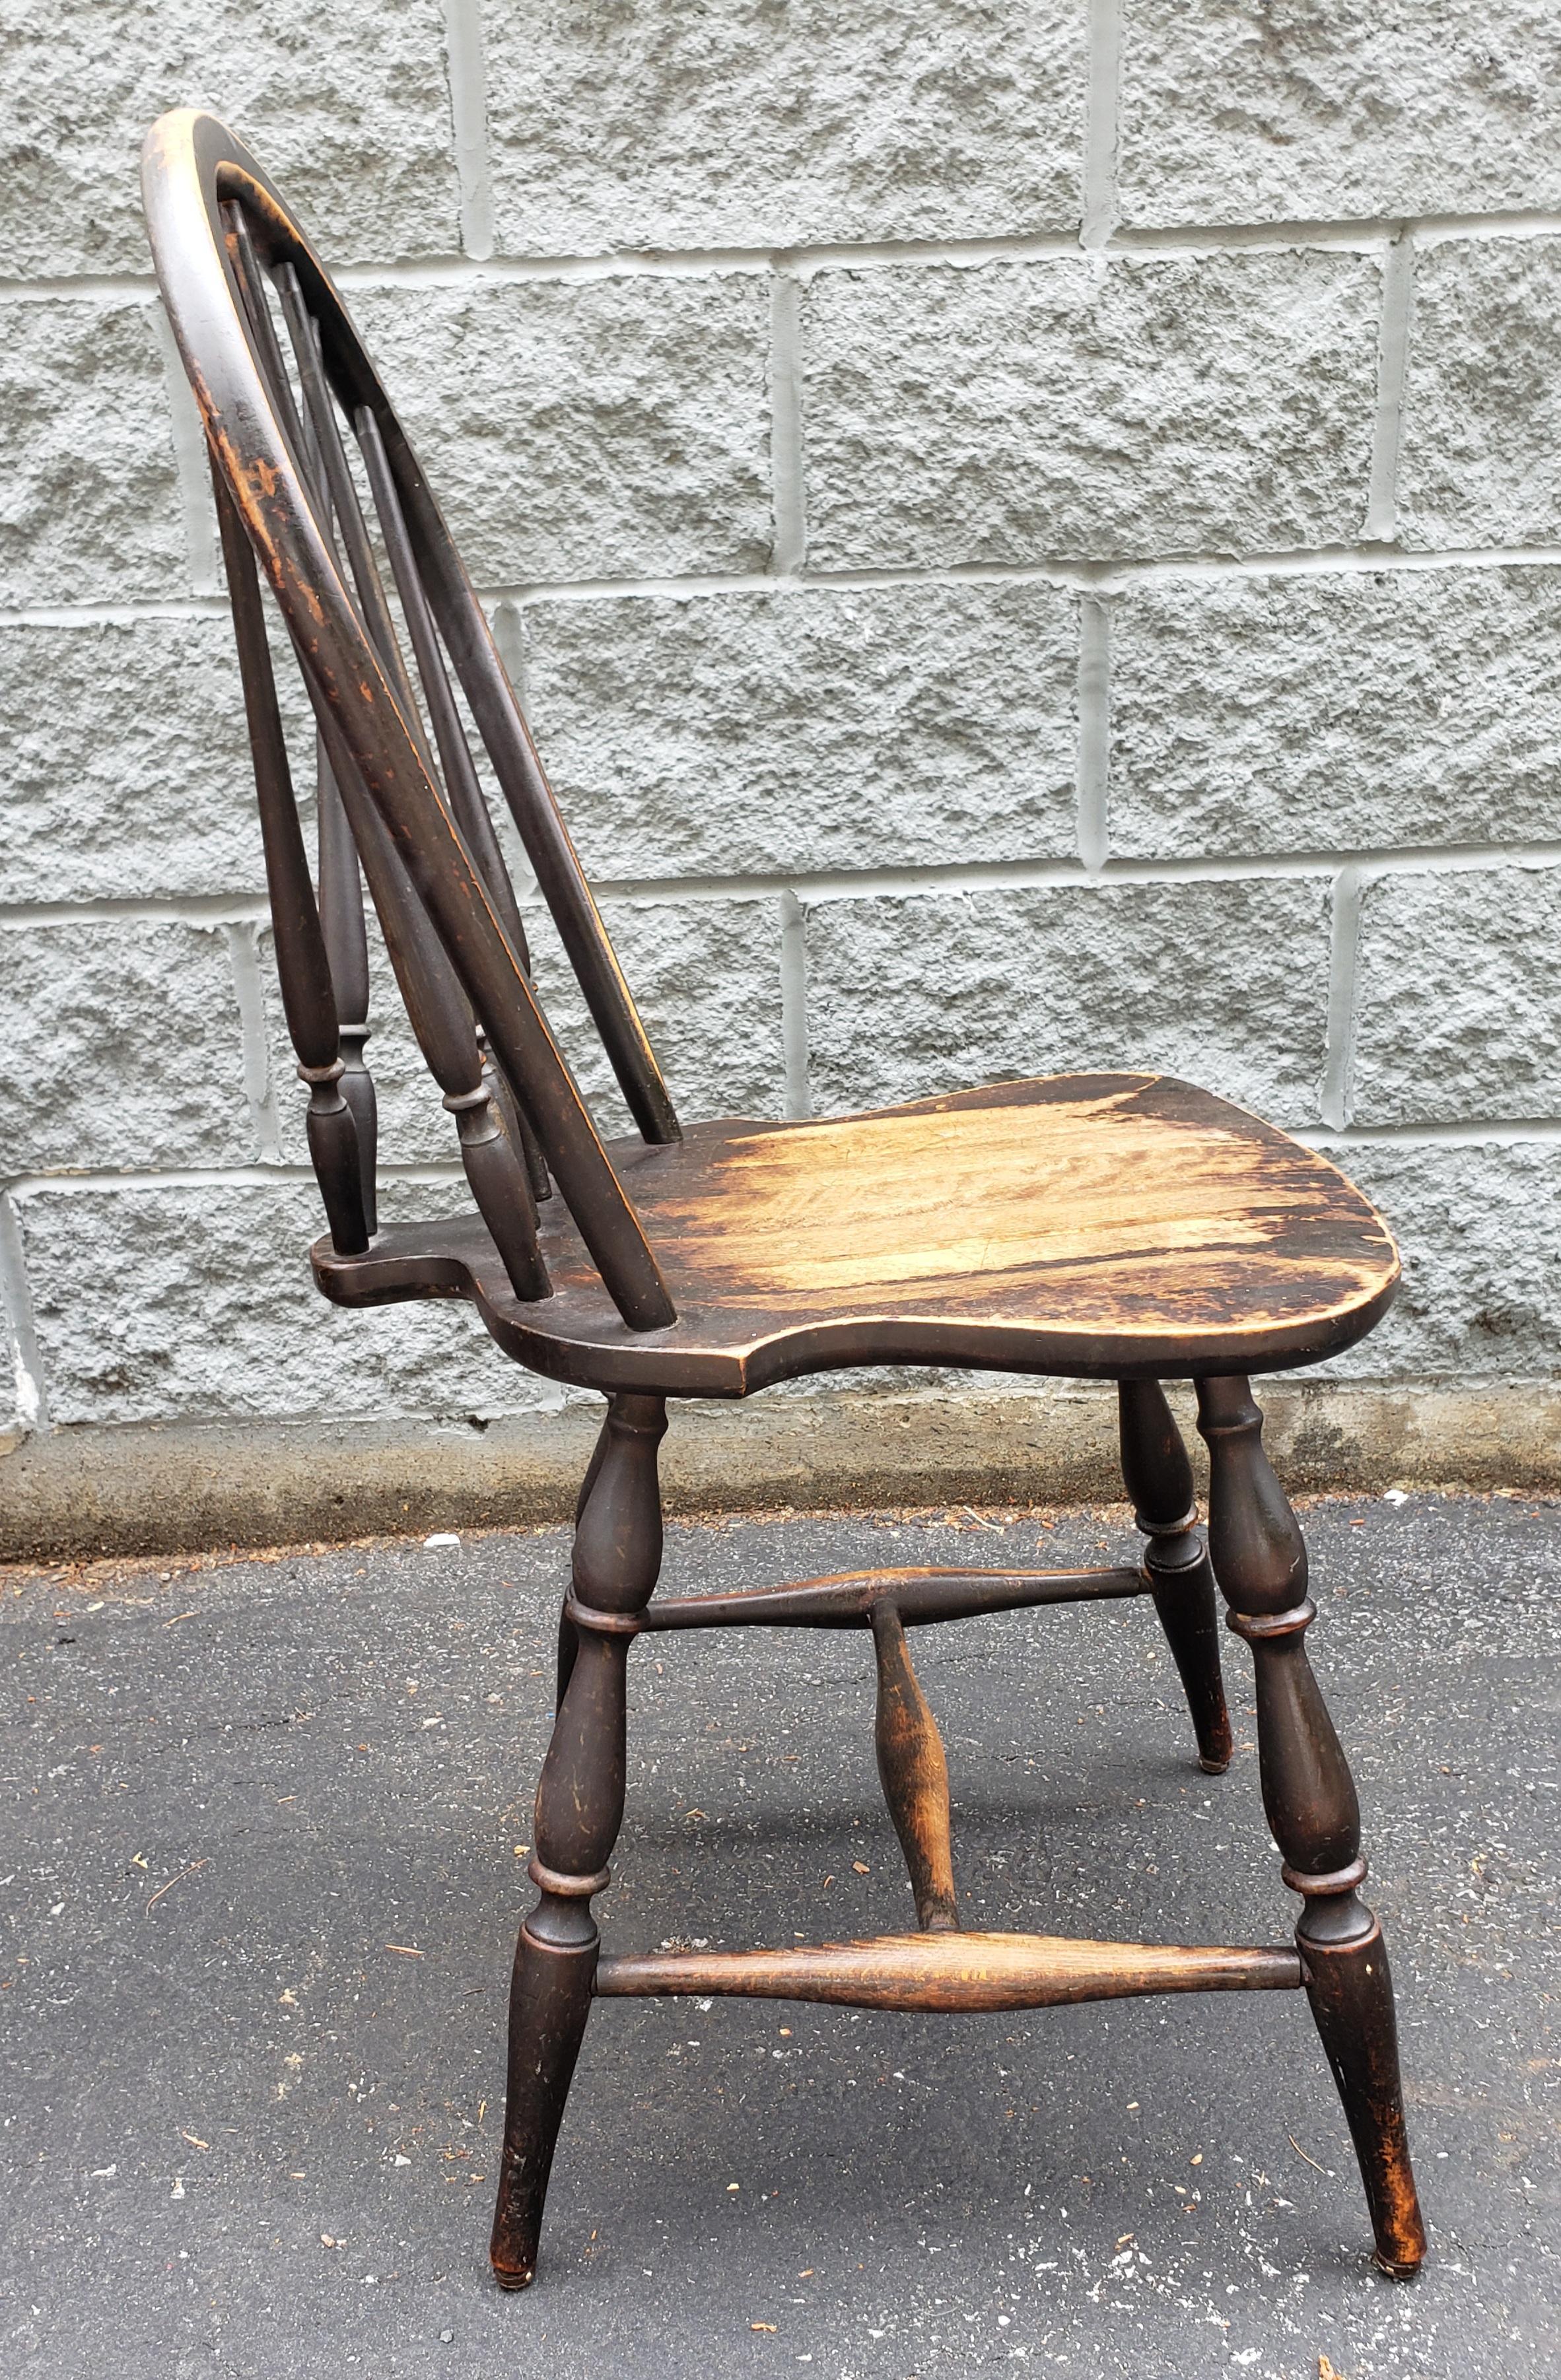 A beautifully crafted antique Windsor braceback side chair. This is in good condition with great patina and will be a great addition to your collection.